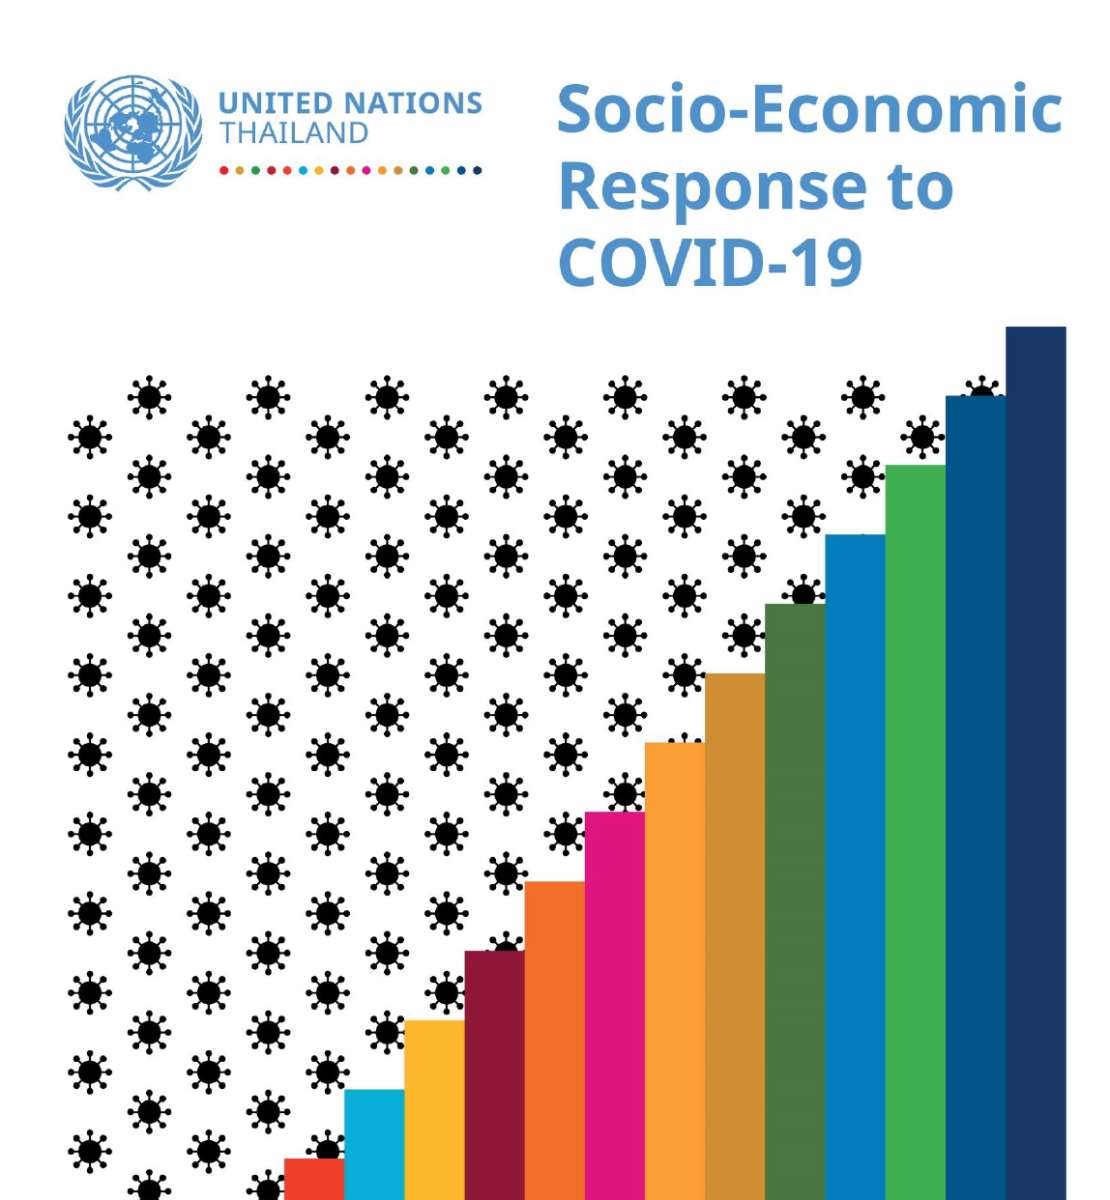 Cover shows the title "Socio-Economic Response to COVID-19 for Thailand" with virus looking black dots and colorful bars.